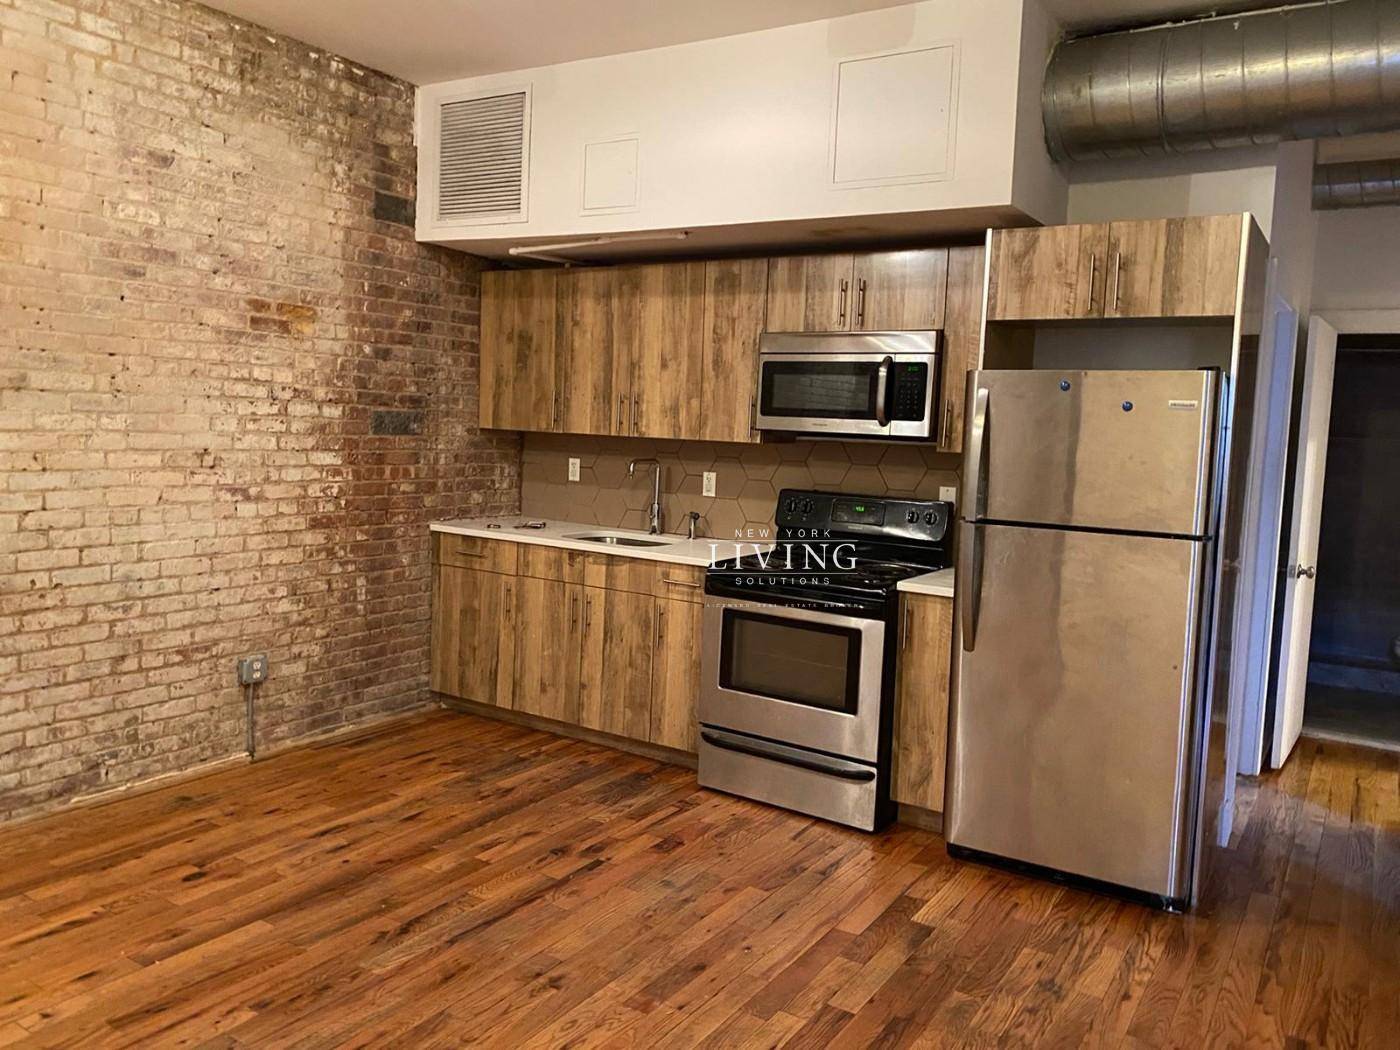 Spacious 8 Bedroom, 3 Bathroom Duplex unit is available for immediate rental located in Clinton Hill section of Brooklyn.